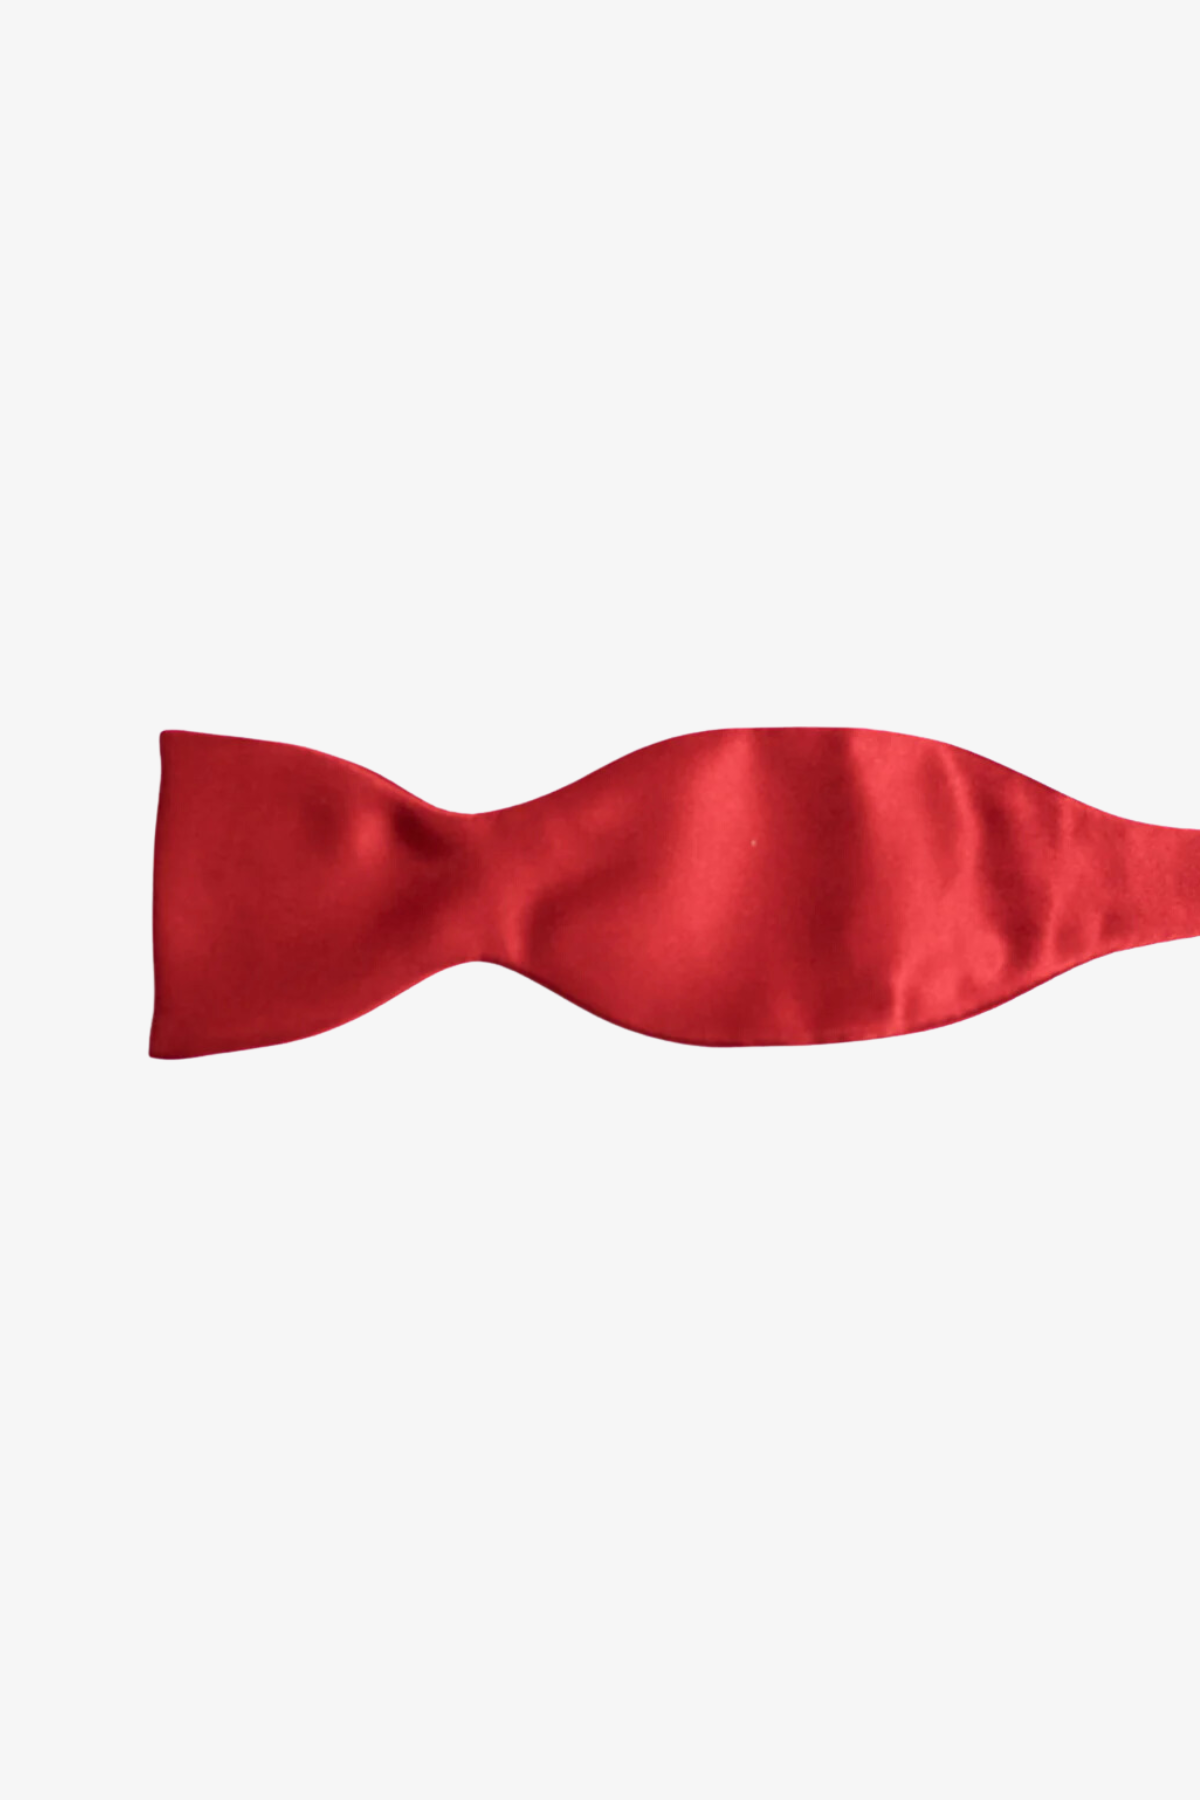 Tie your own Bow Tie - Red